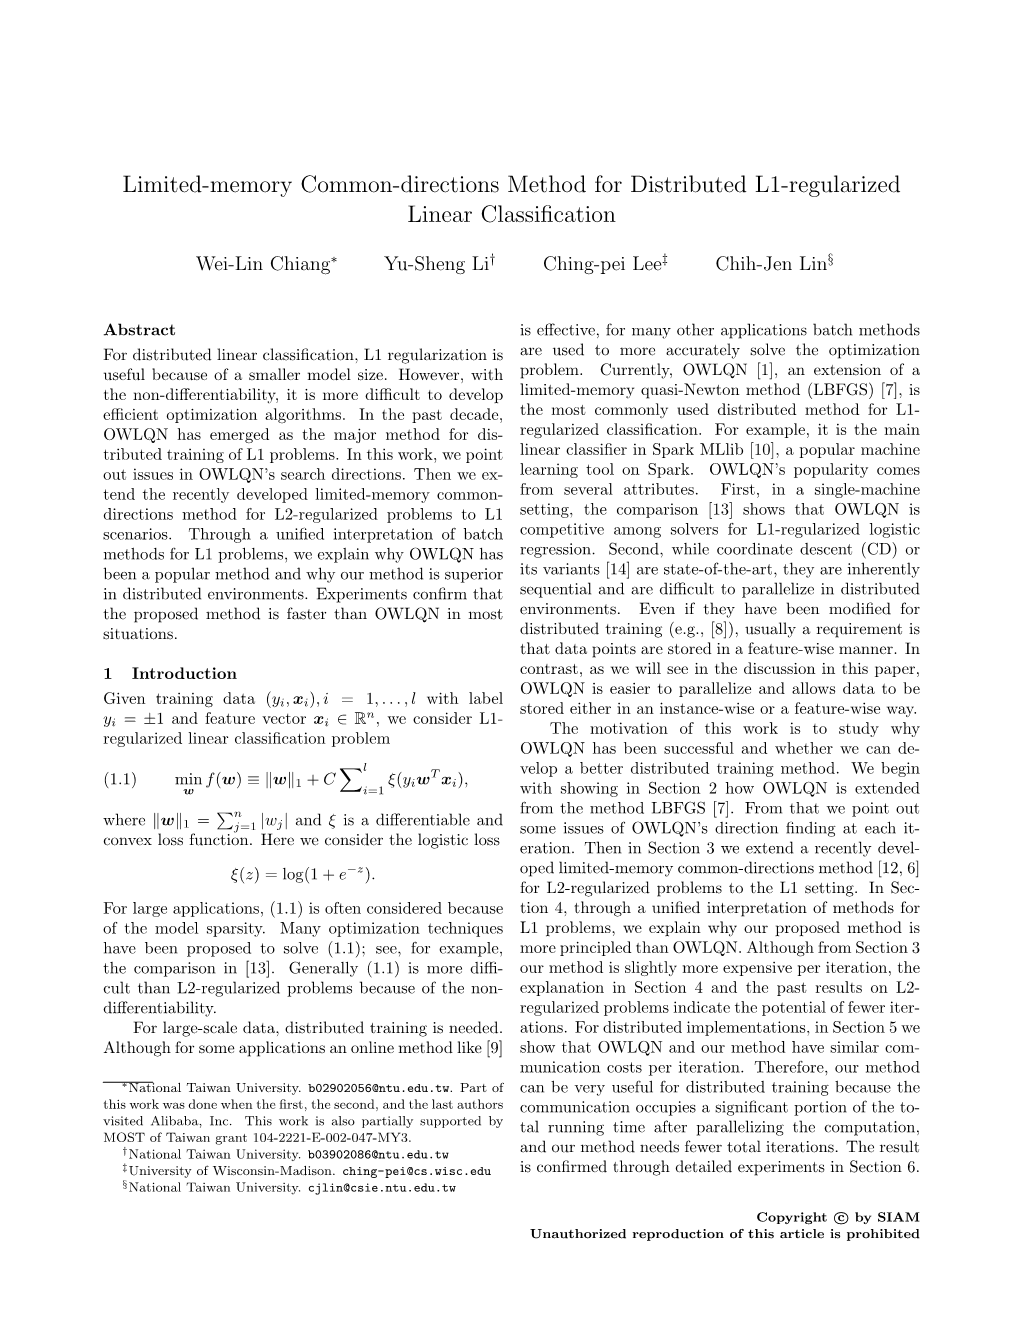 Limited-Memory Common-Directions Method for Distributed L1-Regularized Linear Classiﬁcation